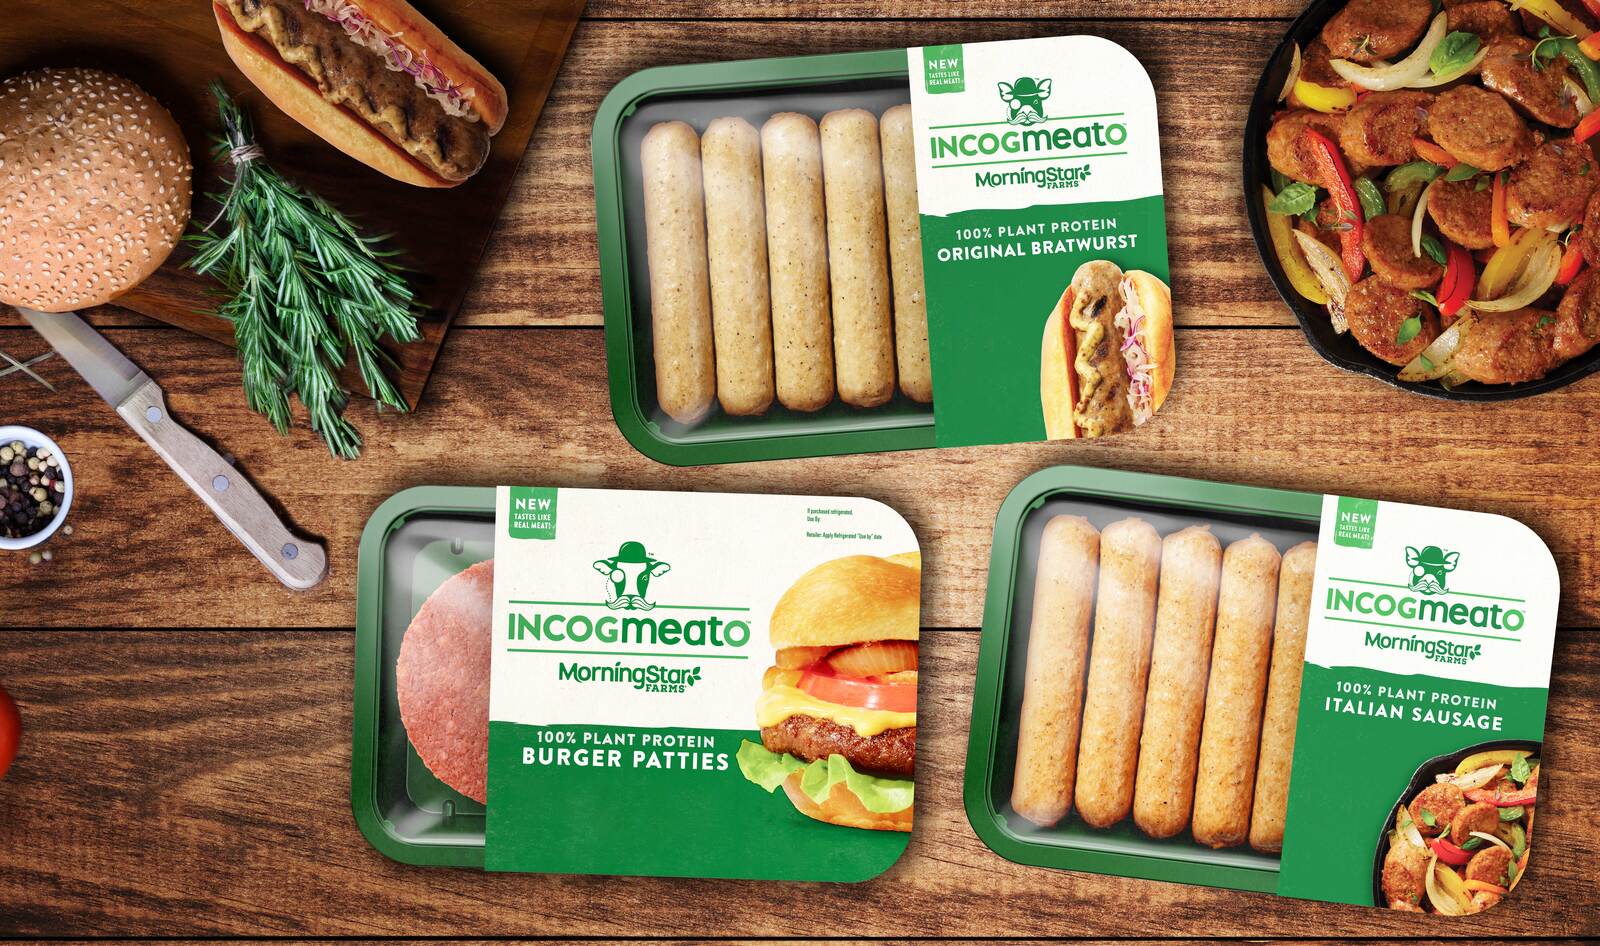 Kellogg's Expands Its “Incogmeato” Line with Vegan Pork Products